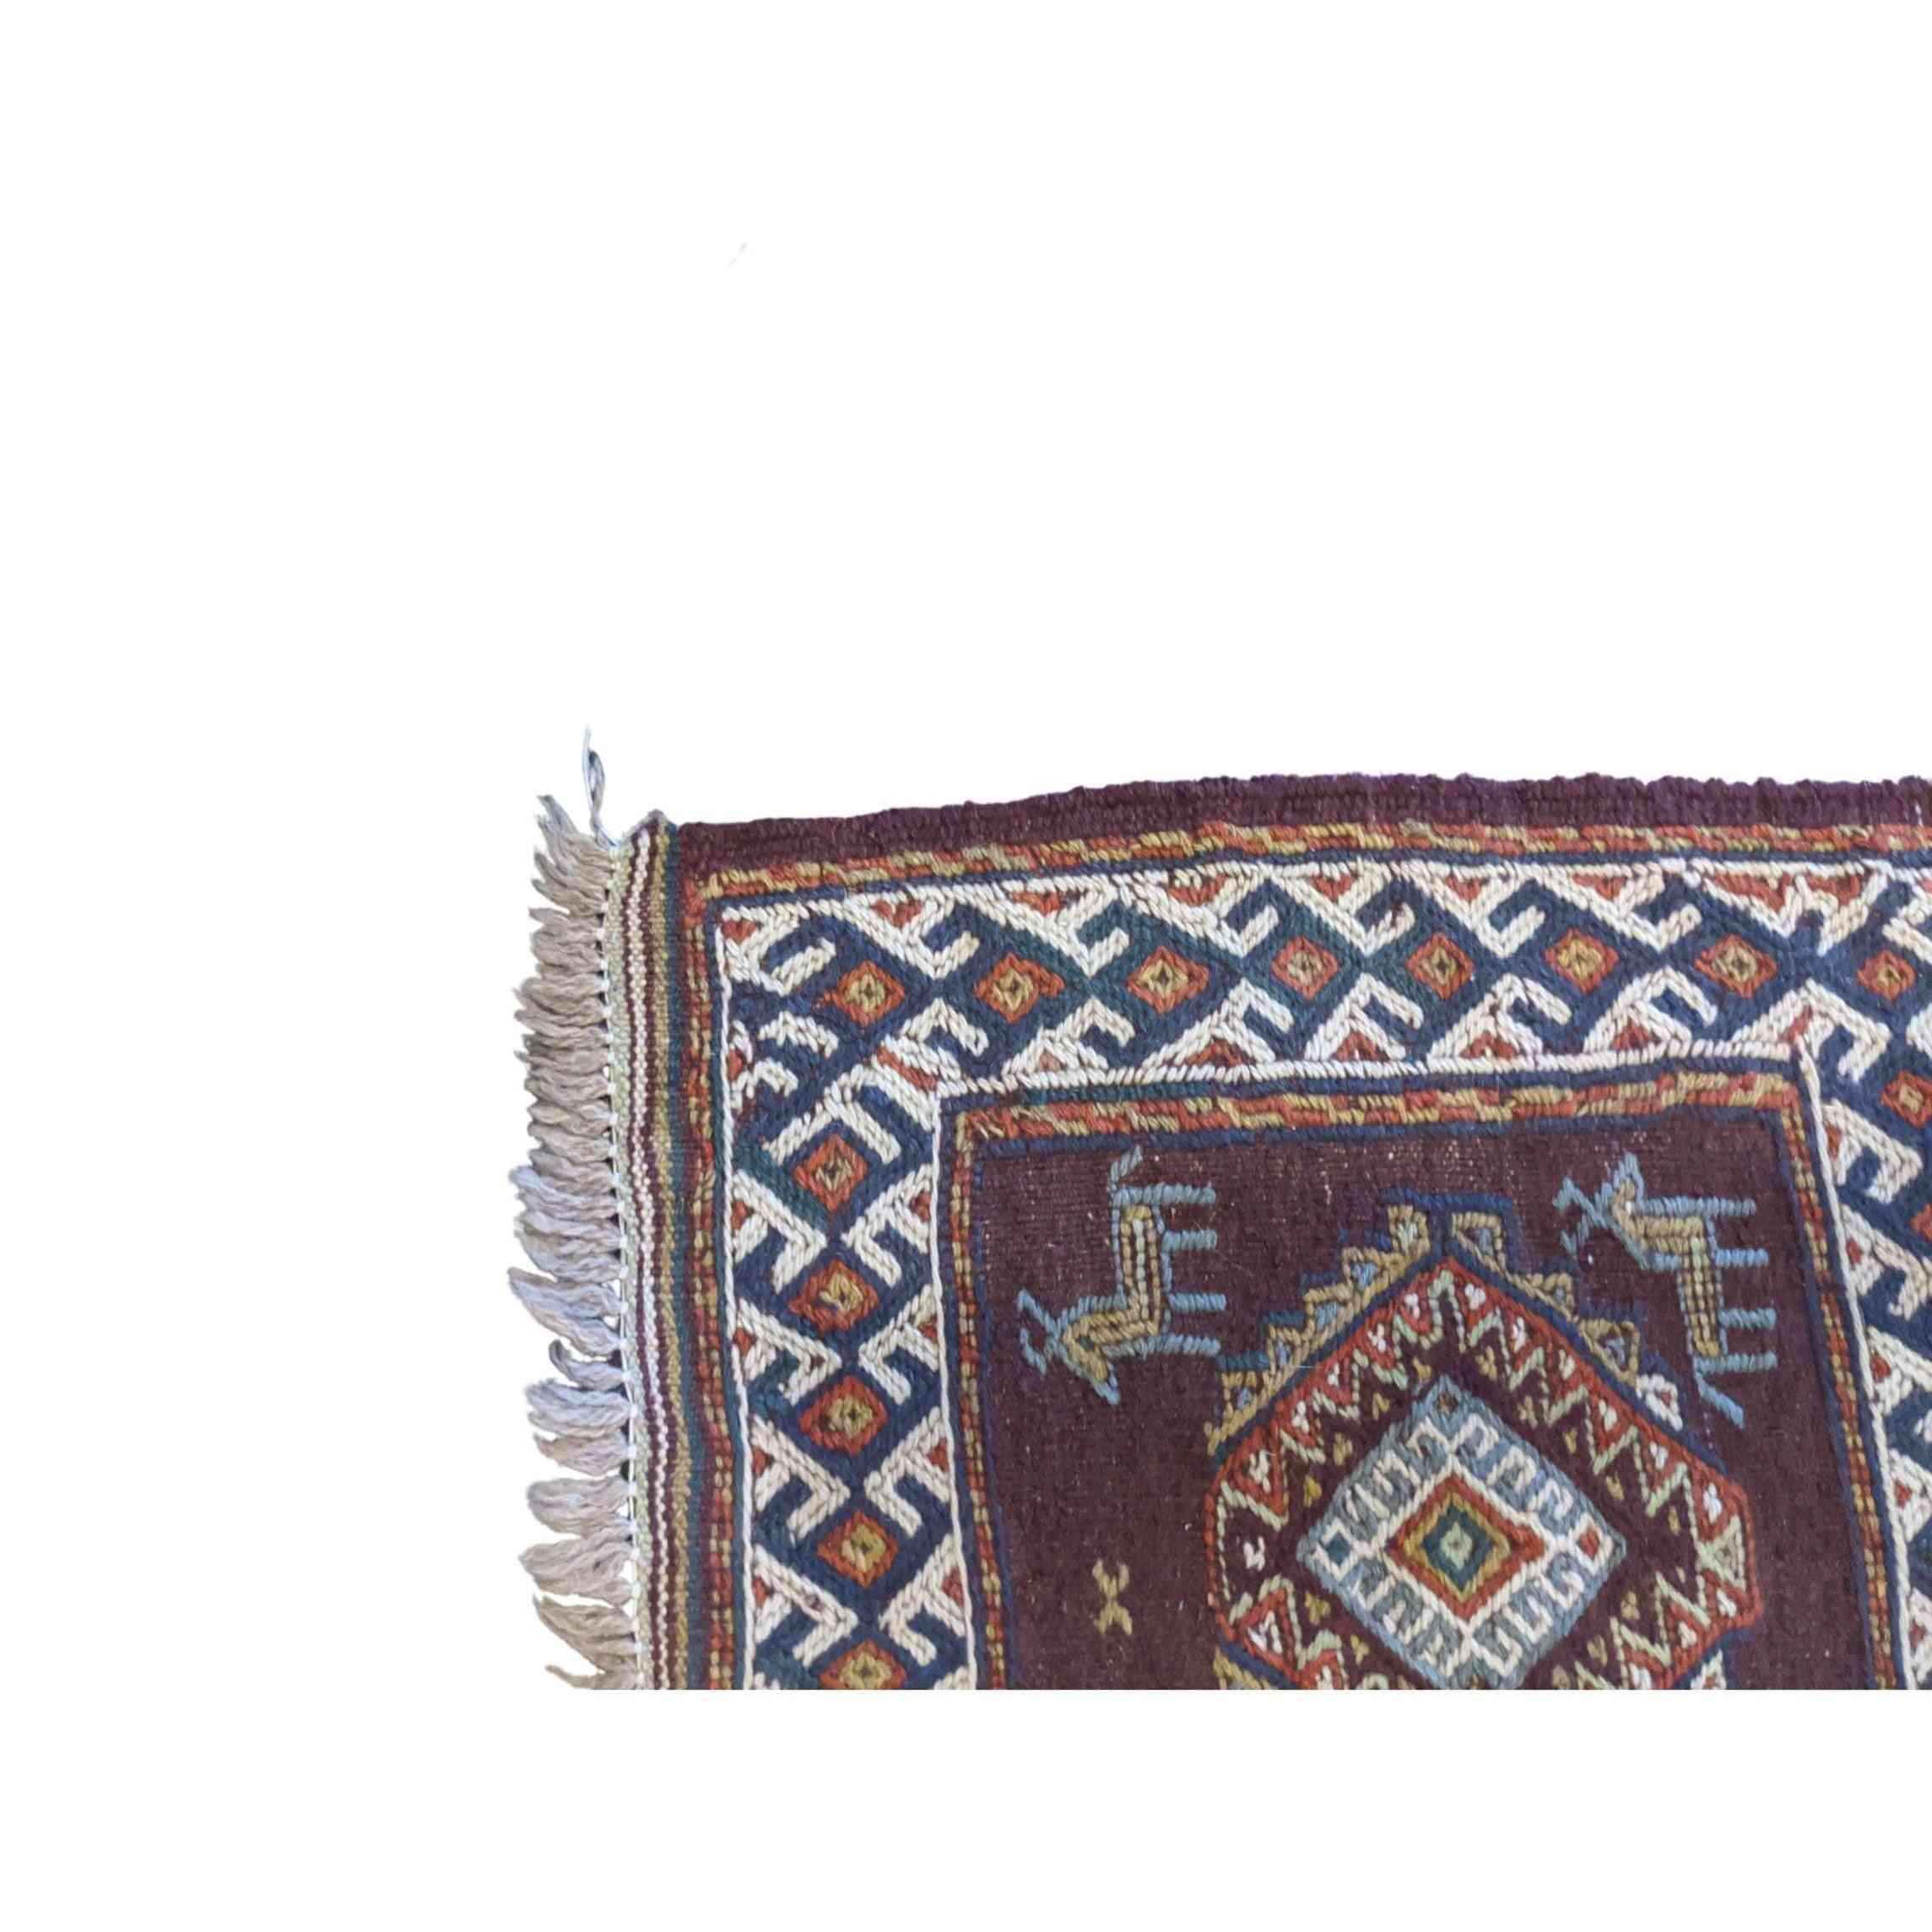 50 x 50 cm Sumak Traditional Brown Small Rug - Rugmaster